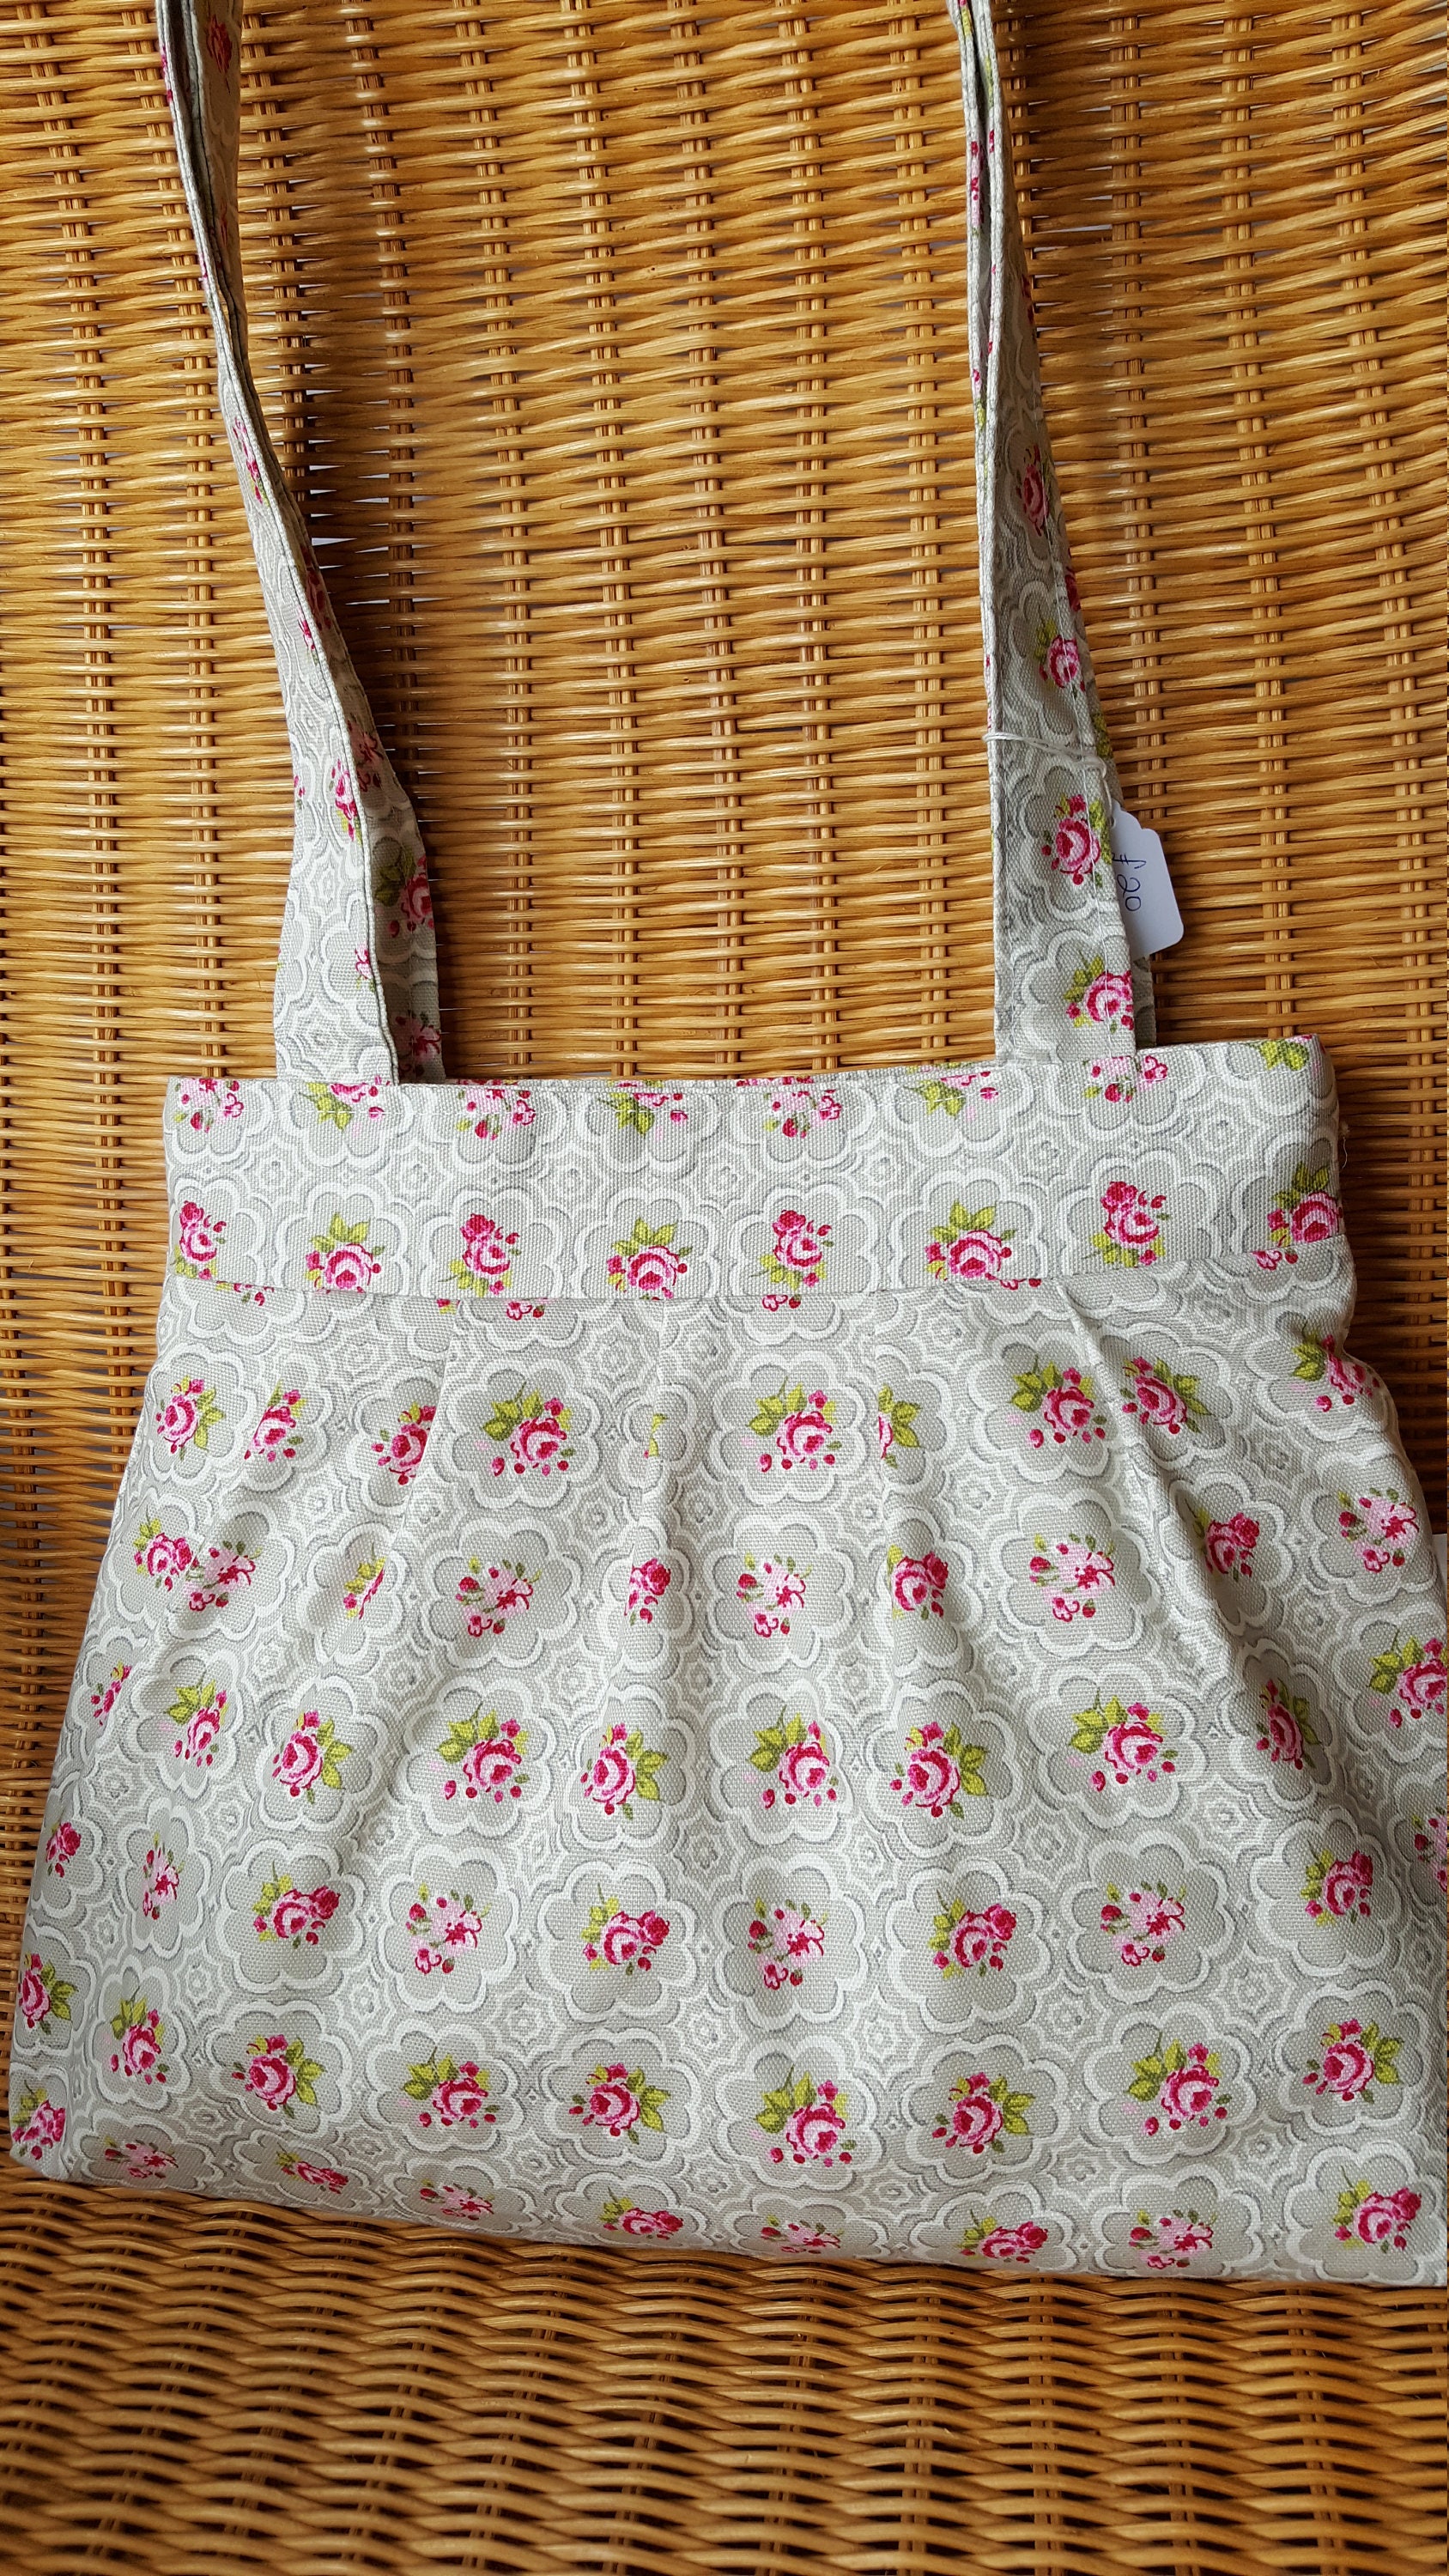 Ladies' lightweight summer bag featuring grey pattern with pink roses